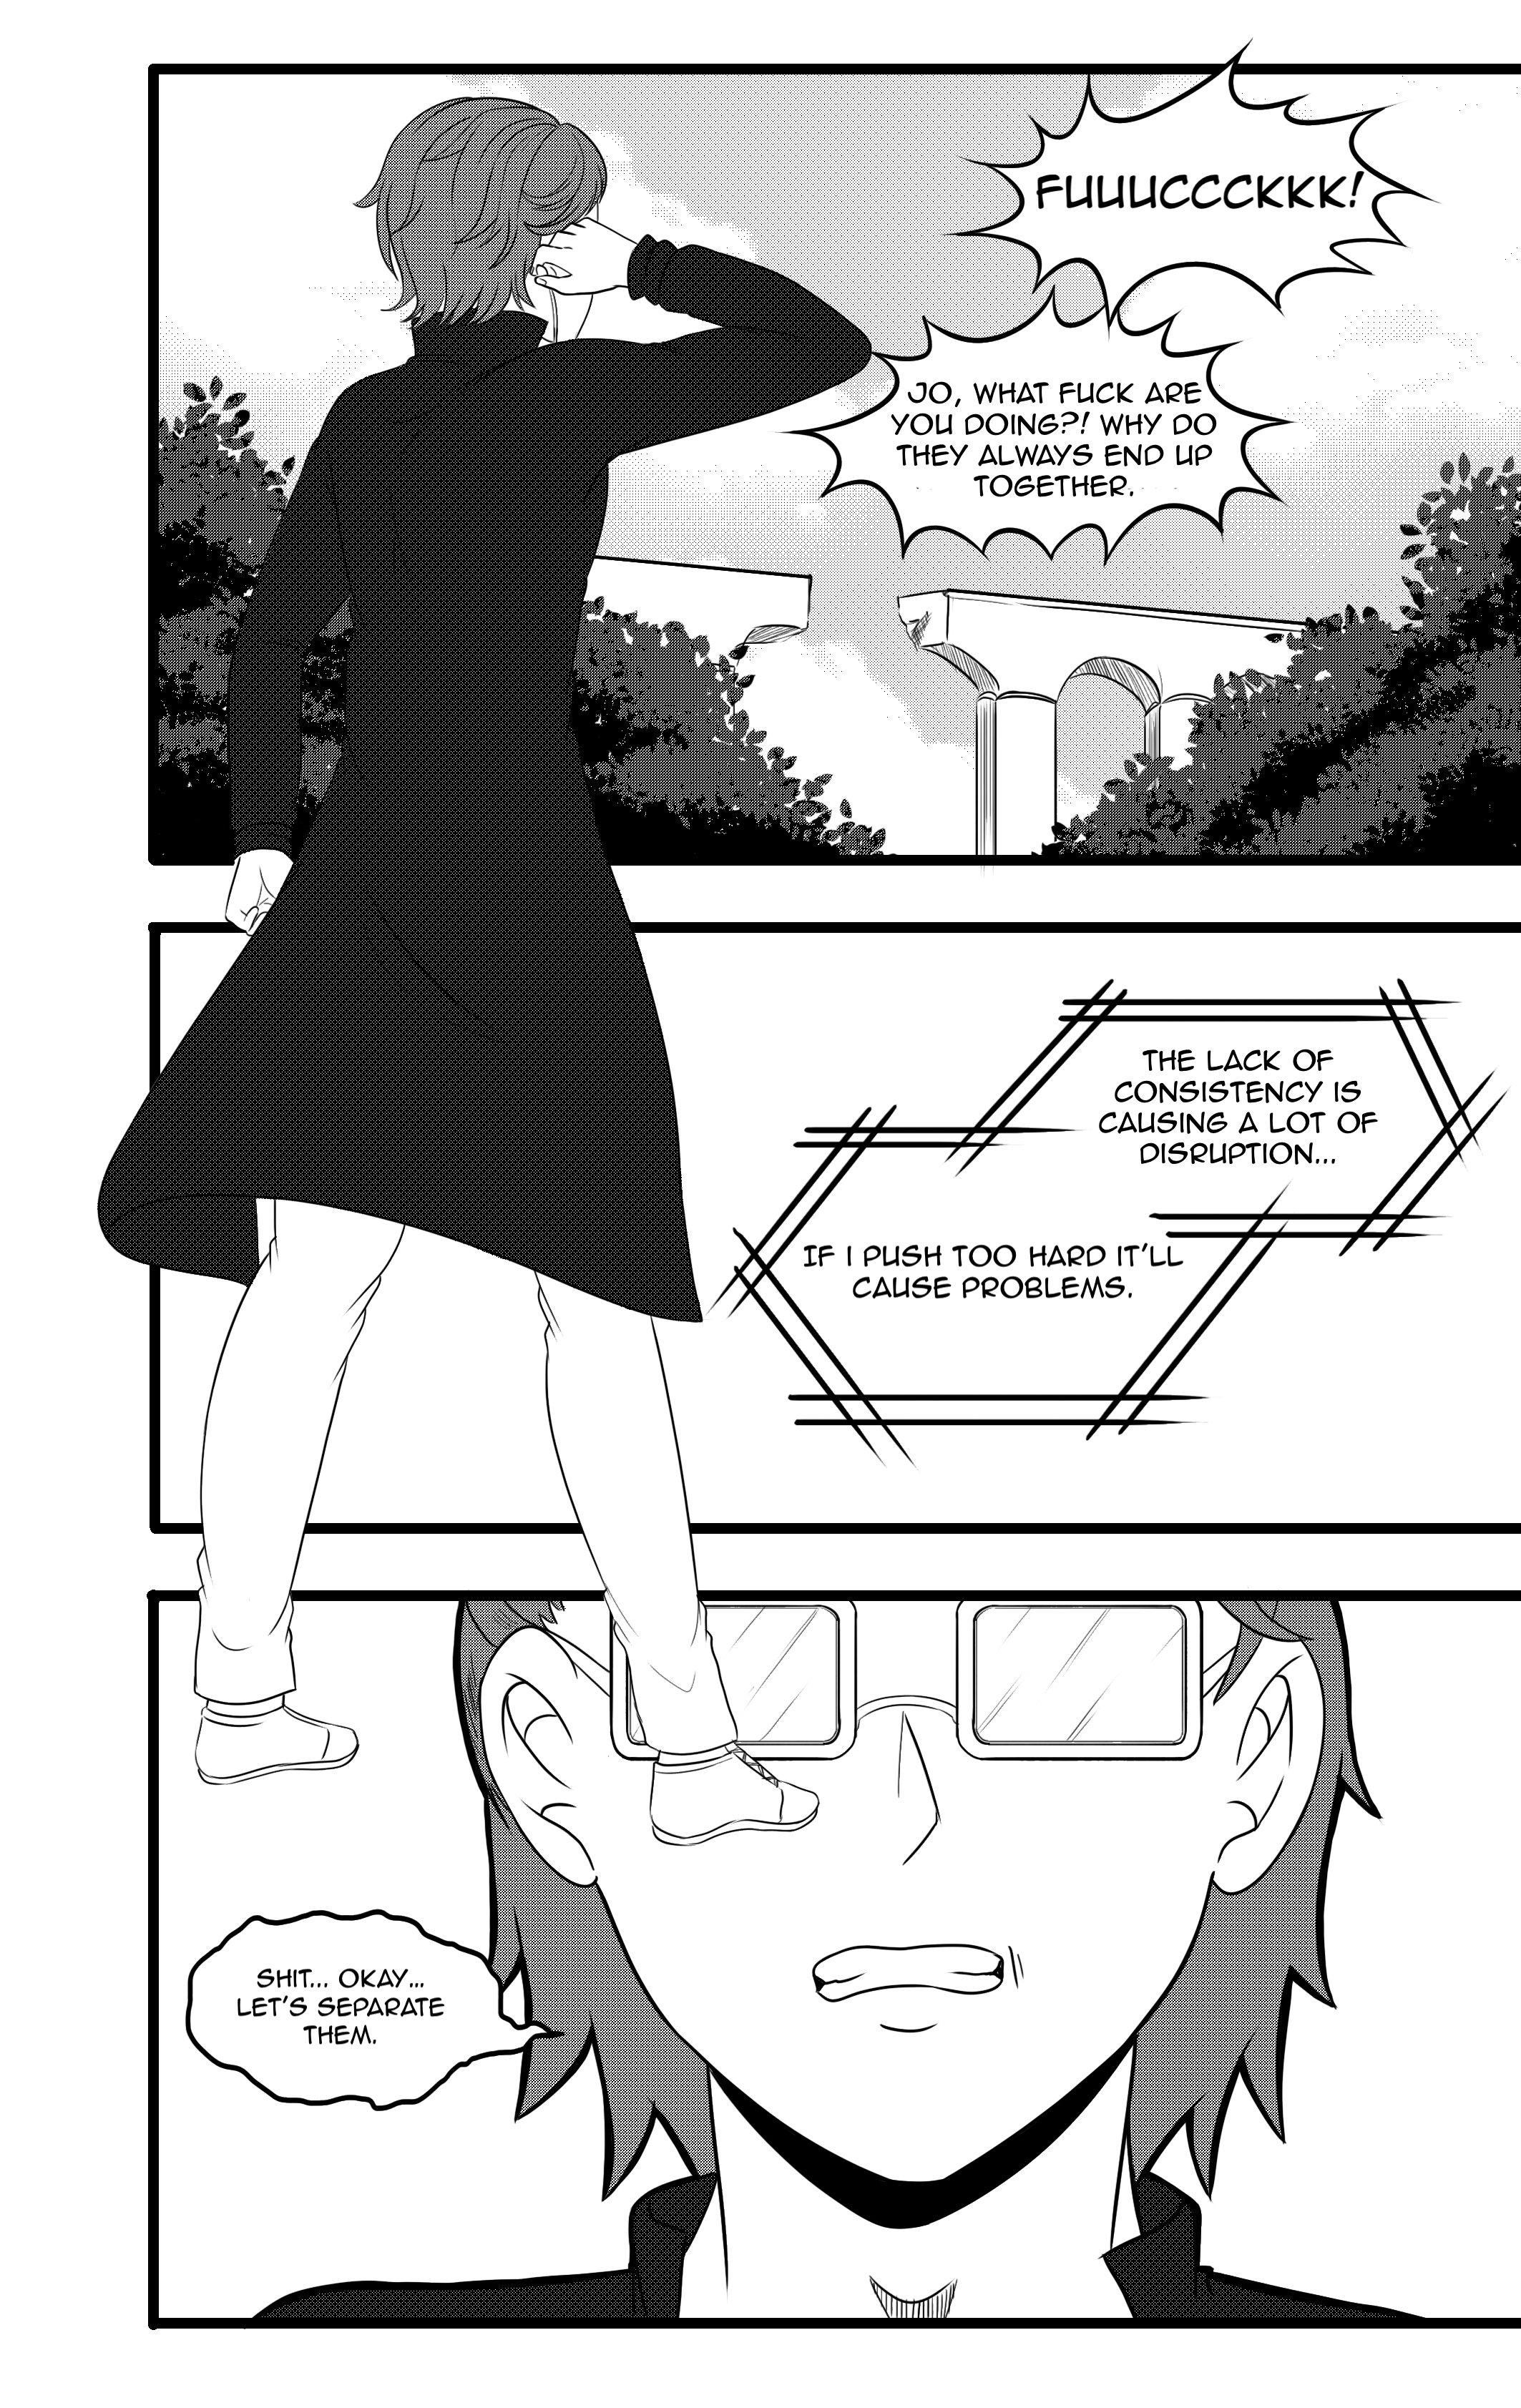 While chapter 5 - page 2